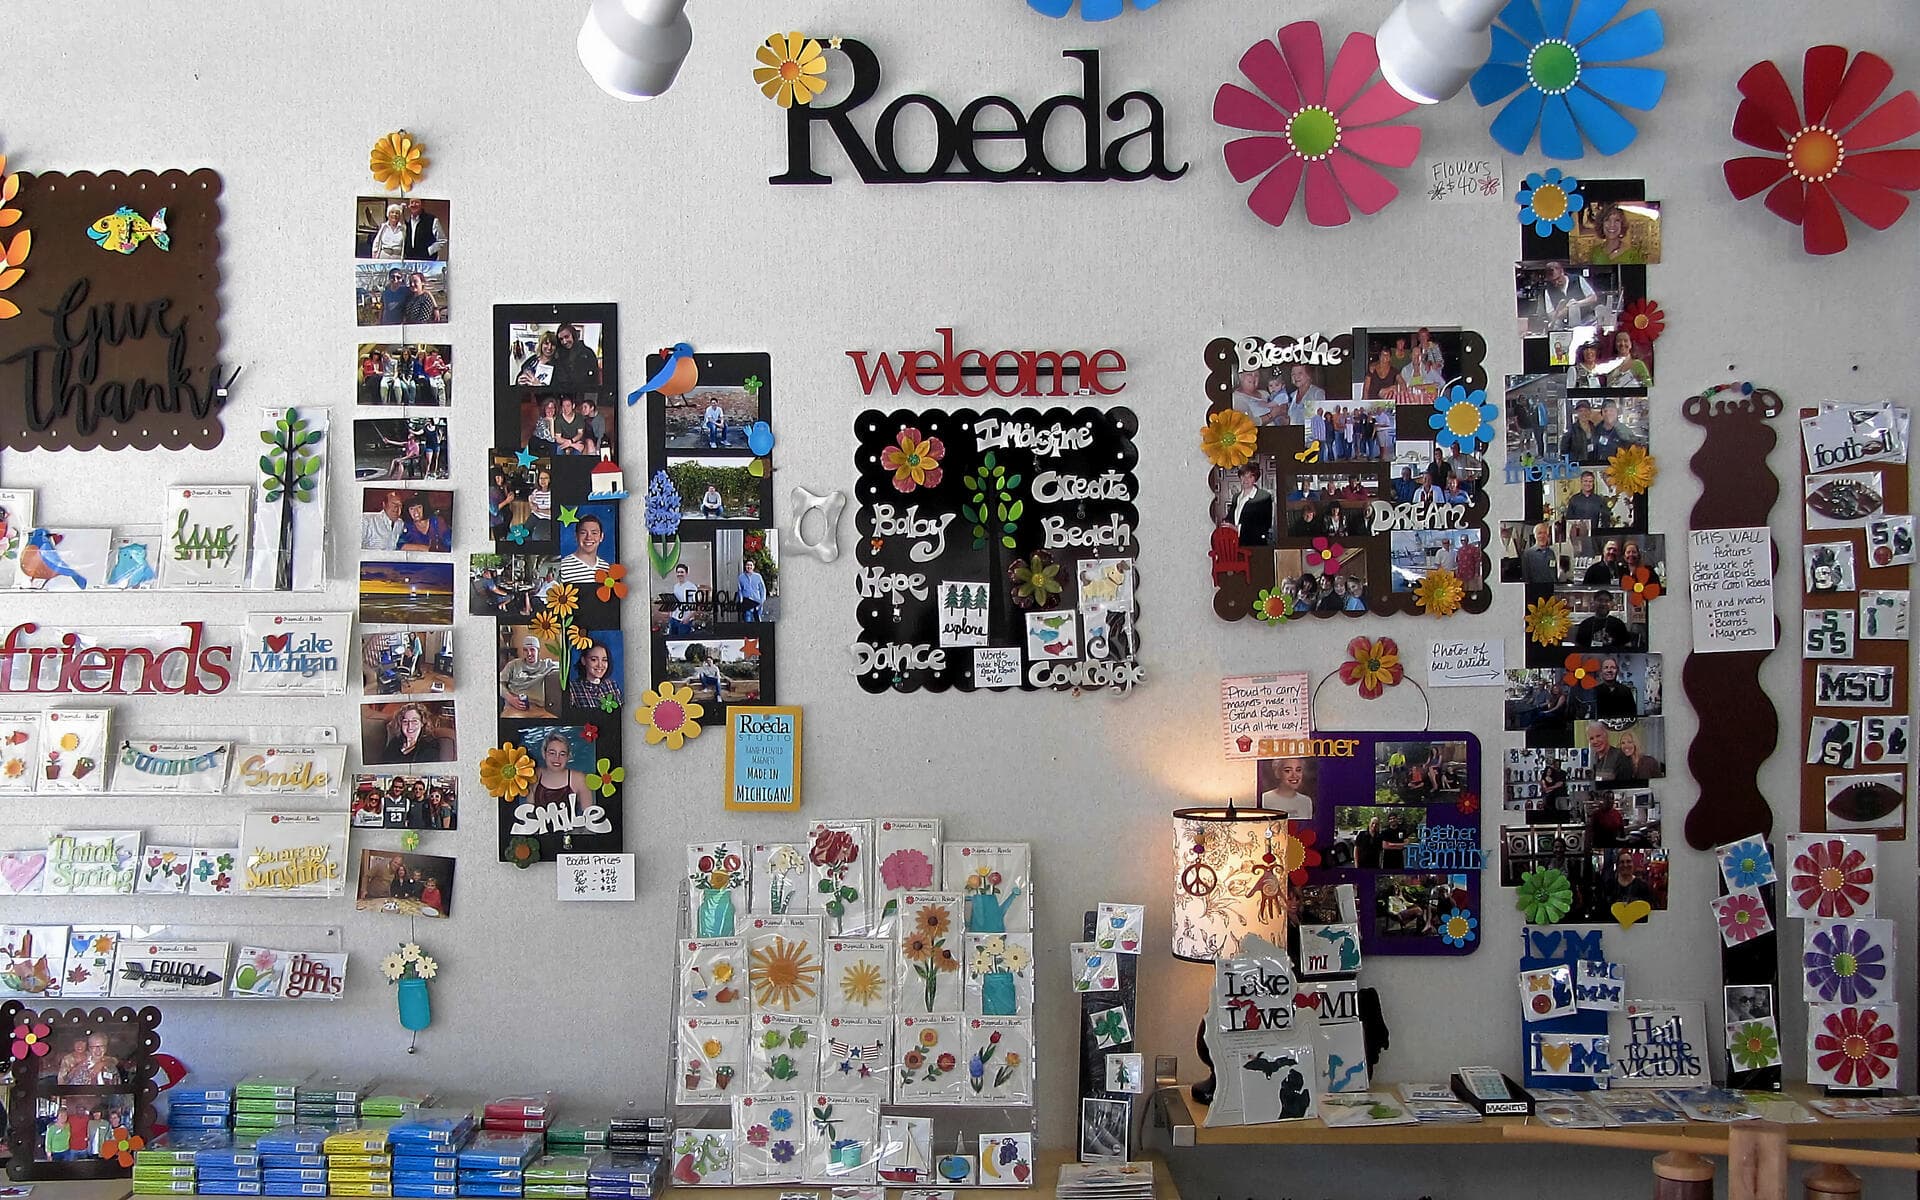 Gallery on the Alley is proud to present roeda